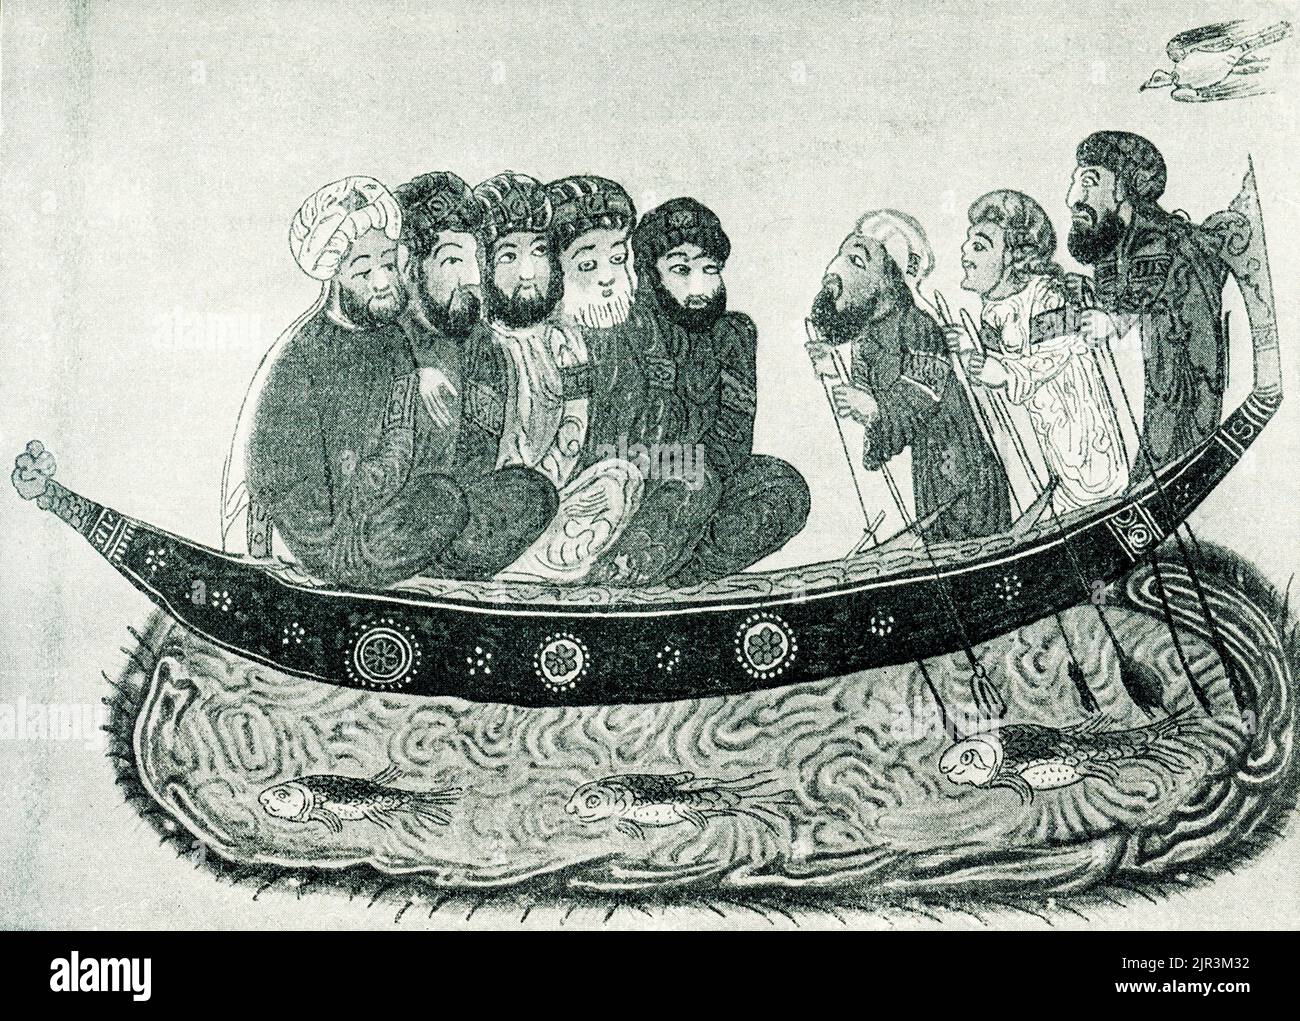 The caption for this 1910 image reads: “Persians and Turks - a miniature from the Maqamat al-Hariri.  Parisian handwriting.” Al-Hariri of Basra (1054 –1122) was an Arab poet, scholar of the Arabic language and a high government official of the Seljuks. He is best known for writing Maqamat al-Hariri (also known as The Assemblies of al-Hariri), consisting of 50 anecdotes written in stylized prose, which was once memorized by heart by scholars, and Mulhat al-i'rab fi al-nawh, an extensive poem on grammar. Stock Photo